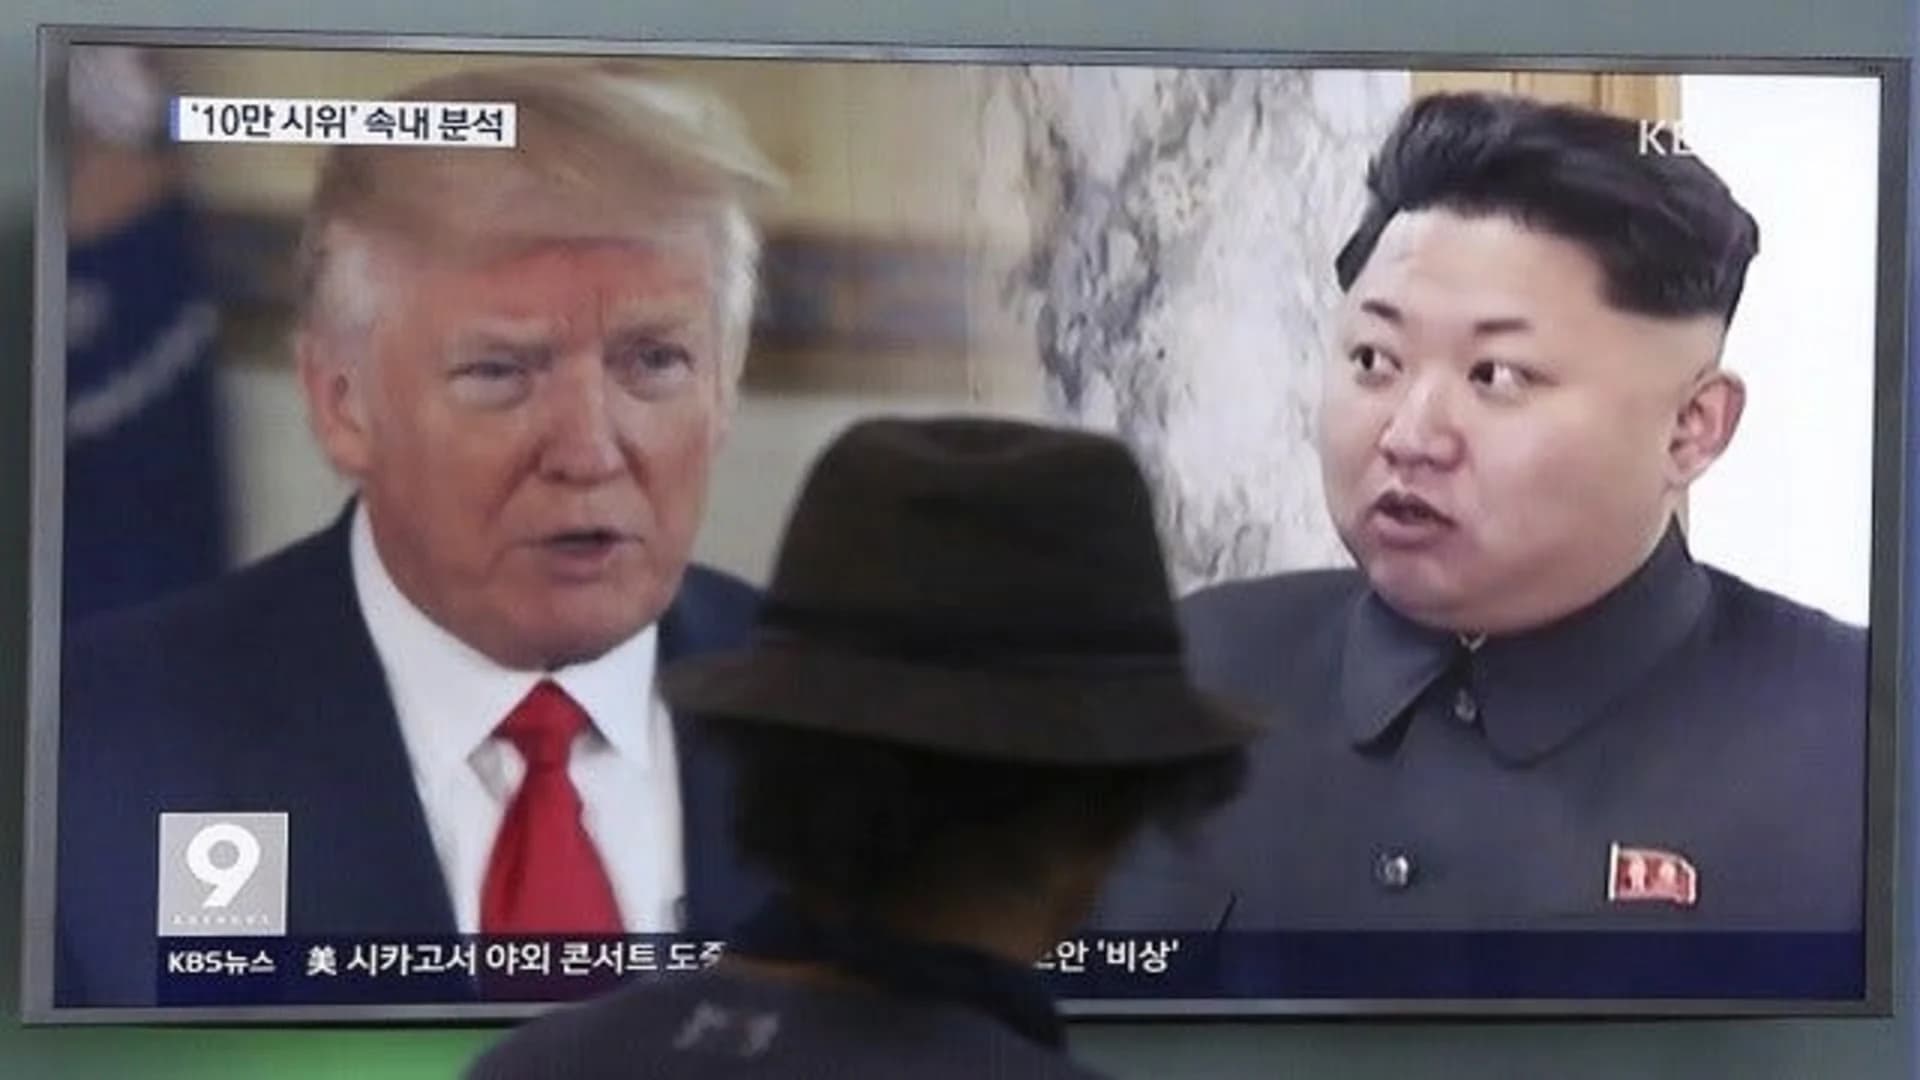 North Korea said to be open to nuke talks with US